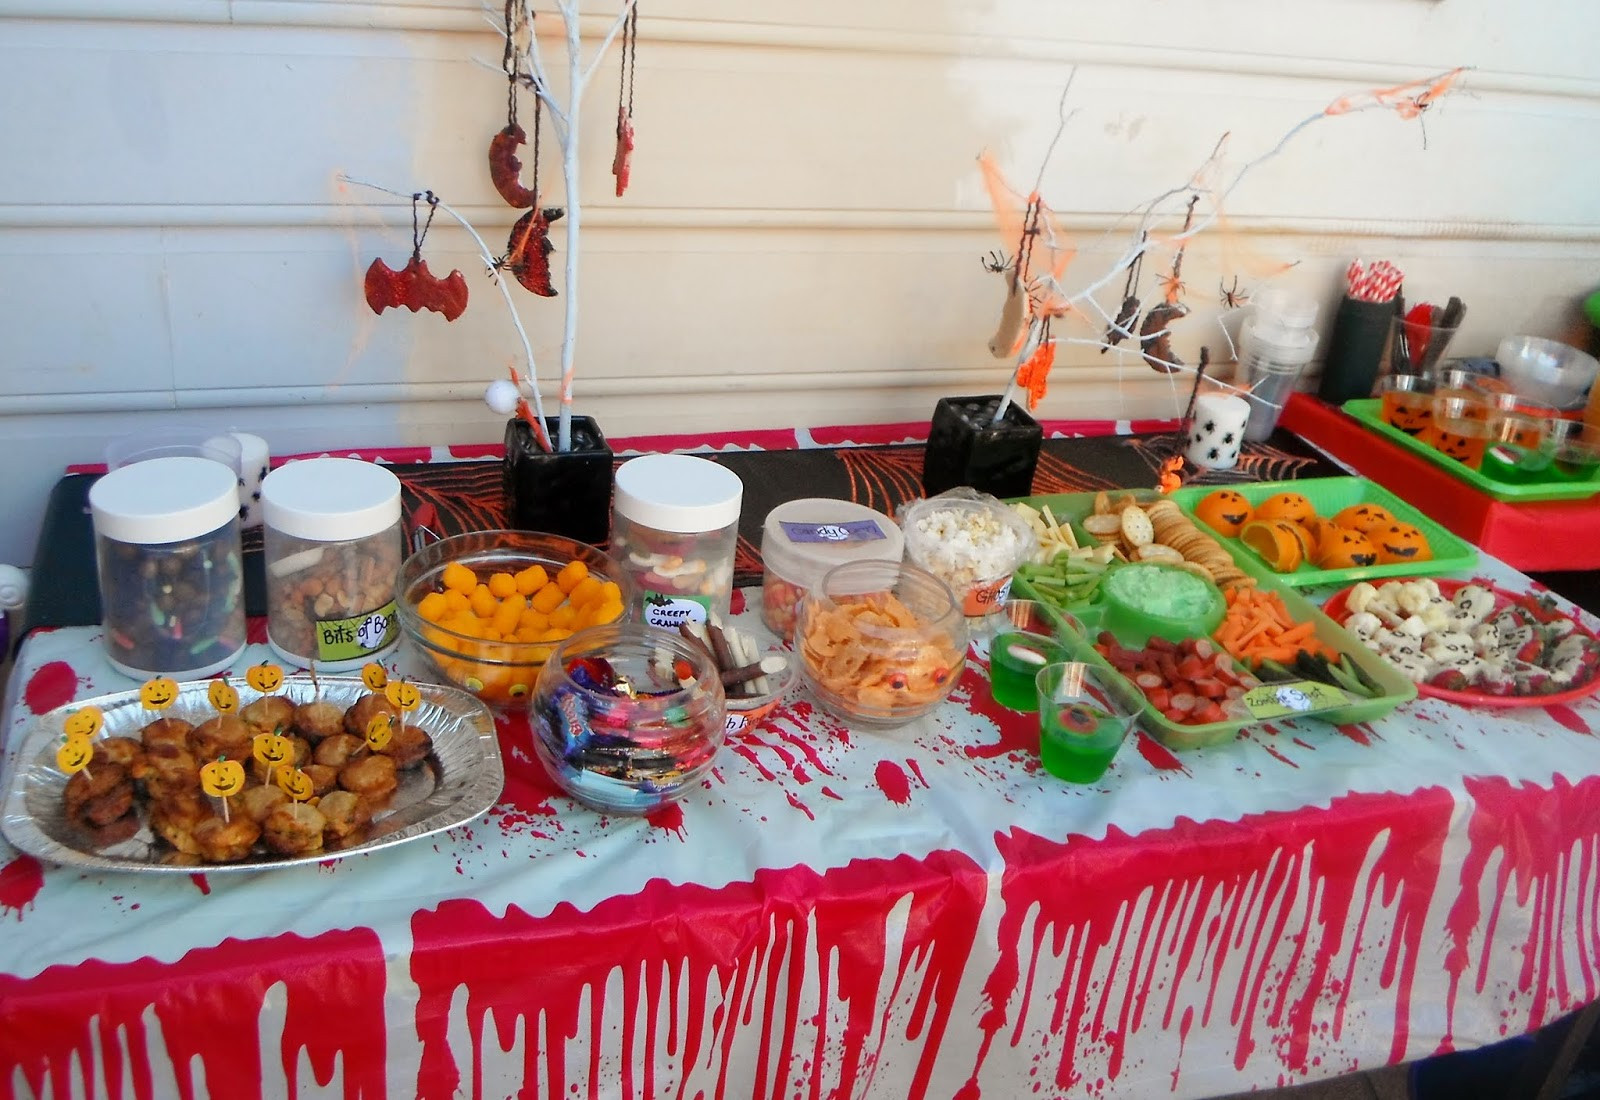 Kids Halloween Party Snacks
 Adventures at home with Mum Halloween Party Food